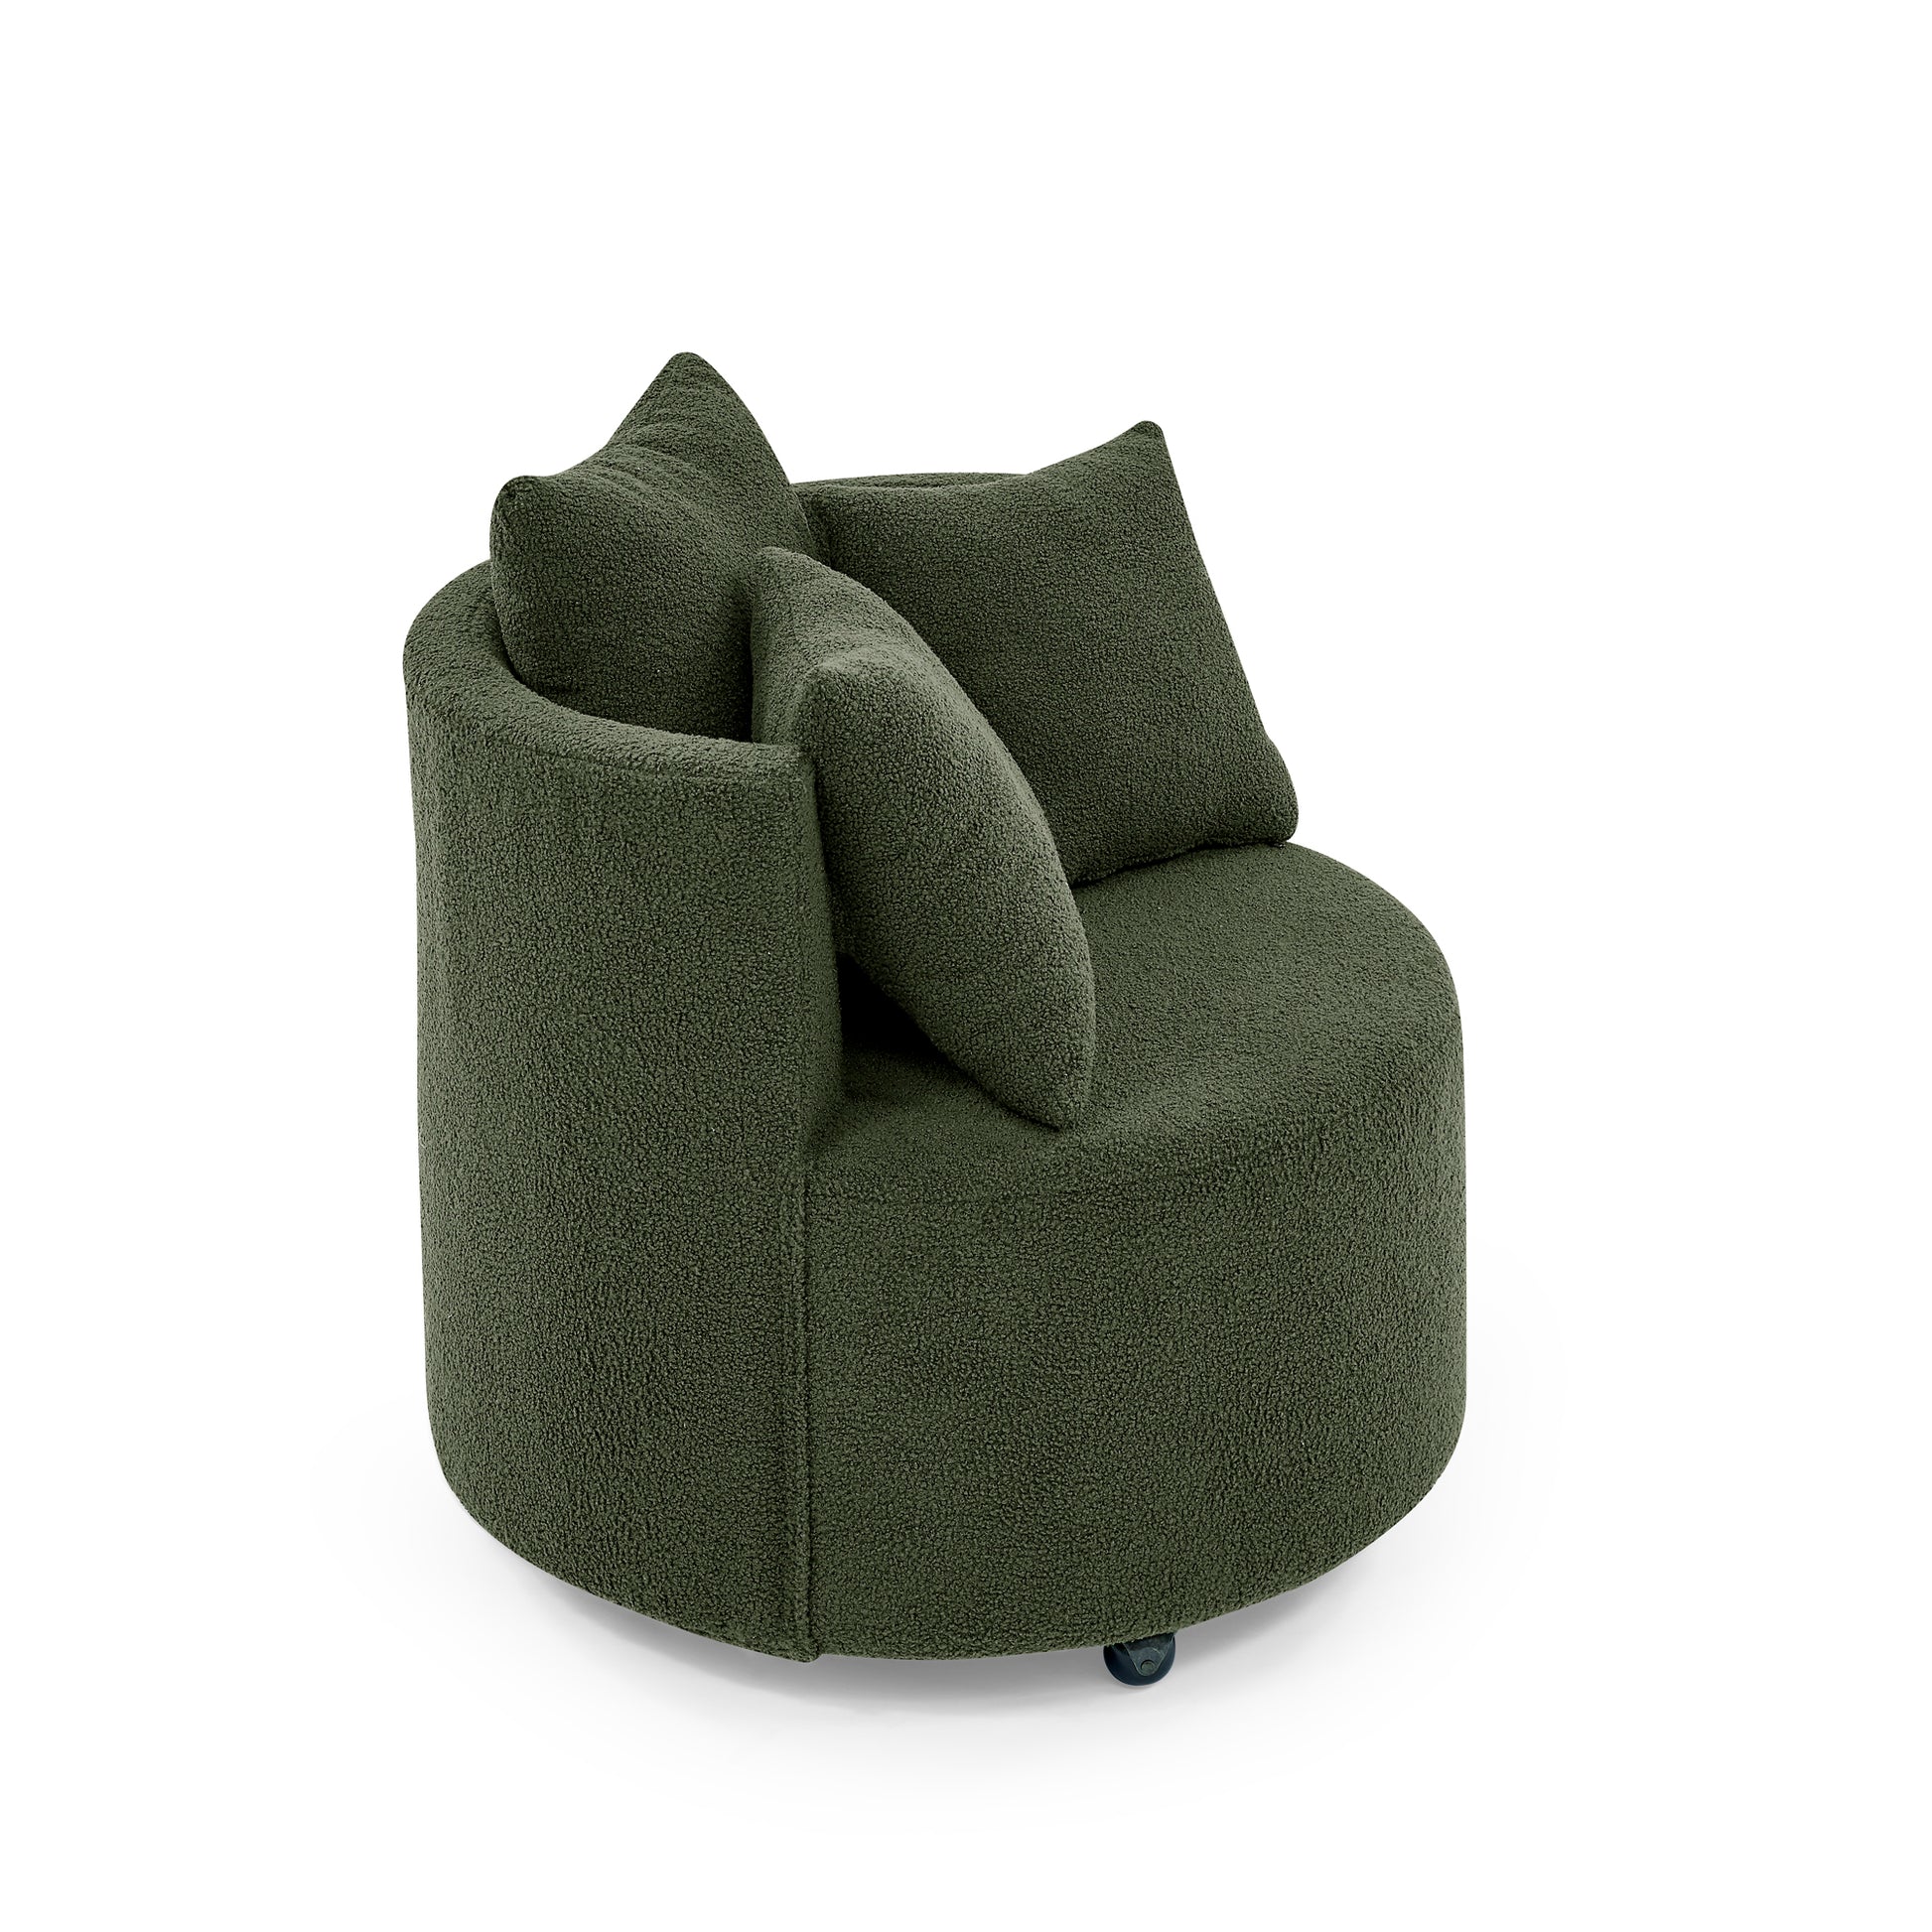 Teddy Fabric Swivel Accent Backchair Upholstered